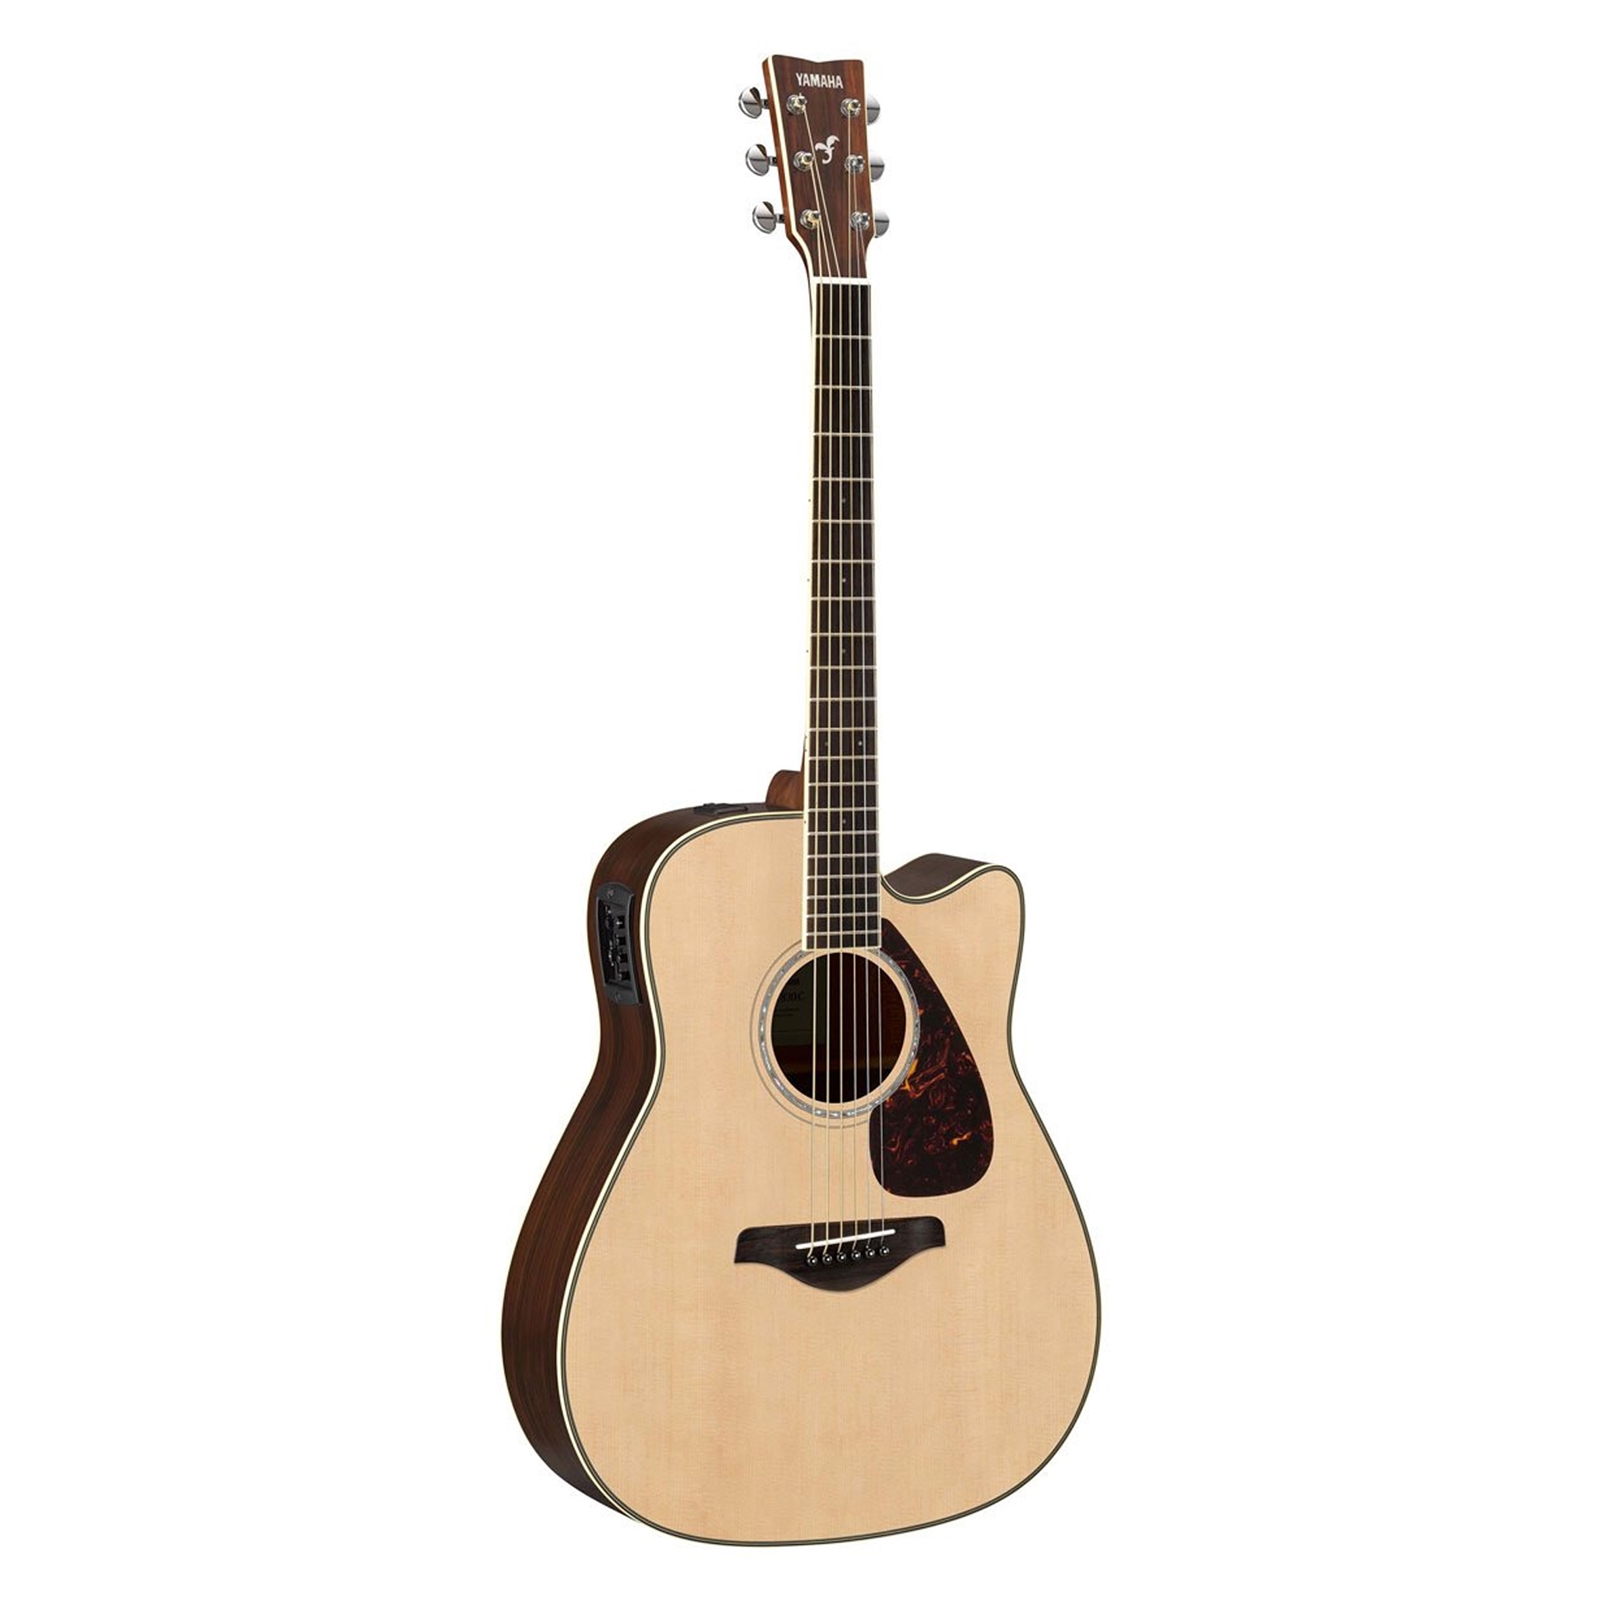 Yamaha FGX830C Dreadnought Acoustic Electric Guitar